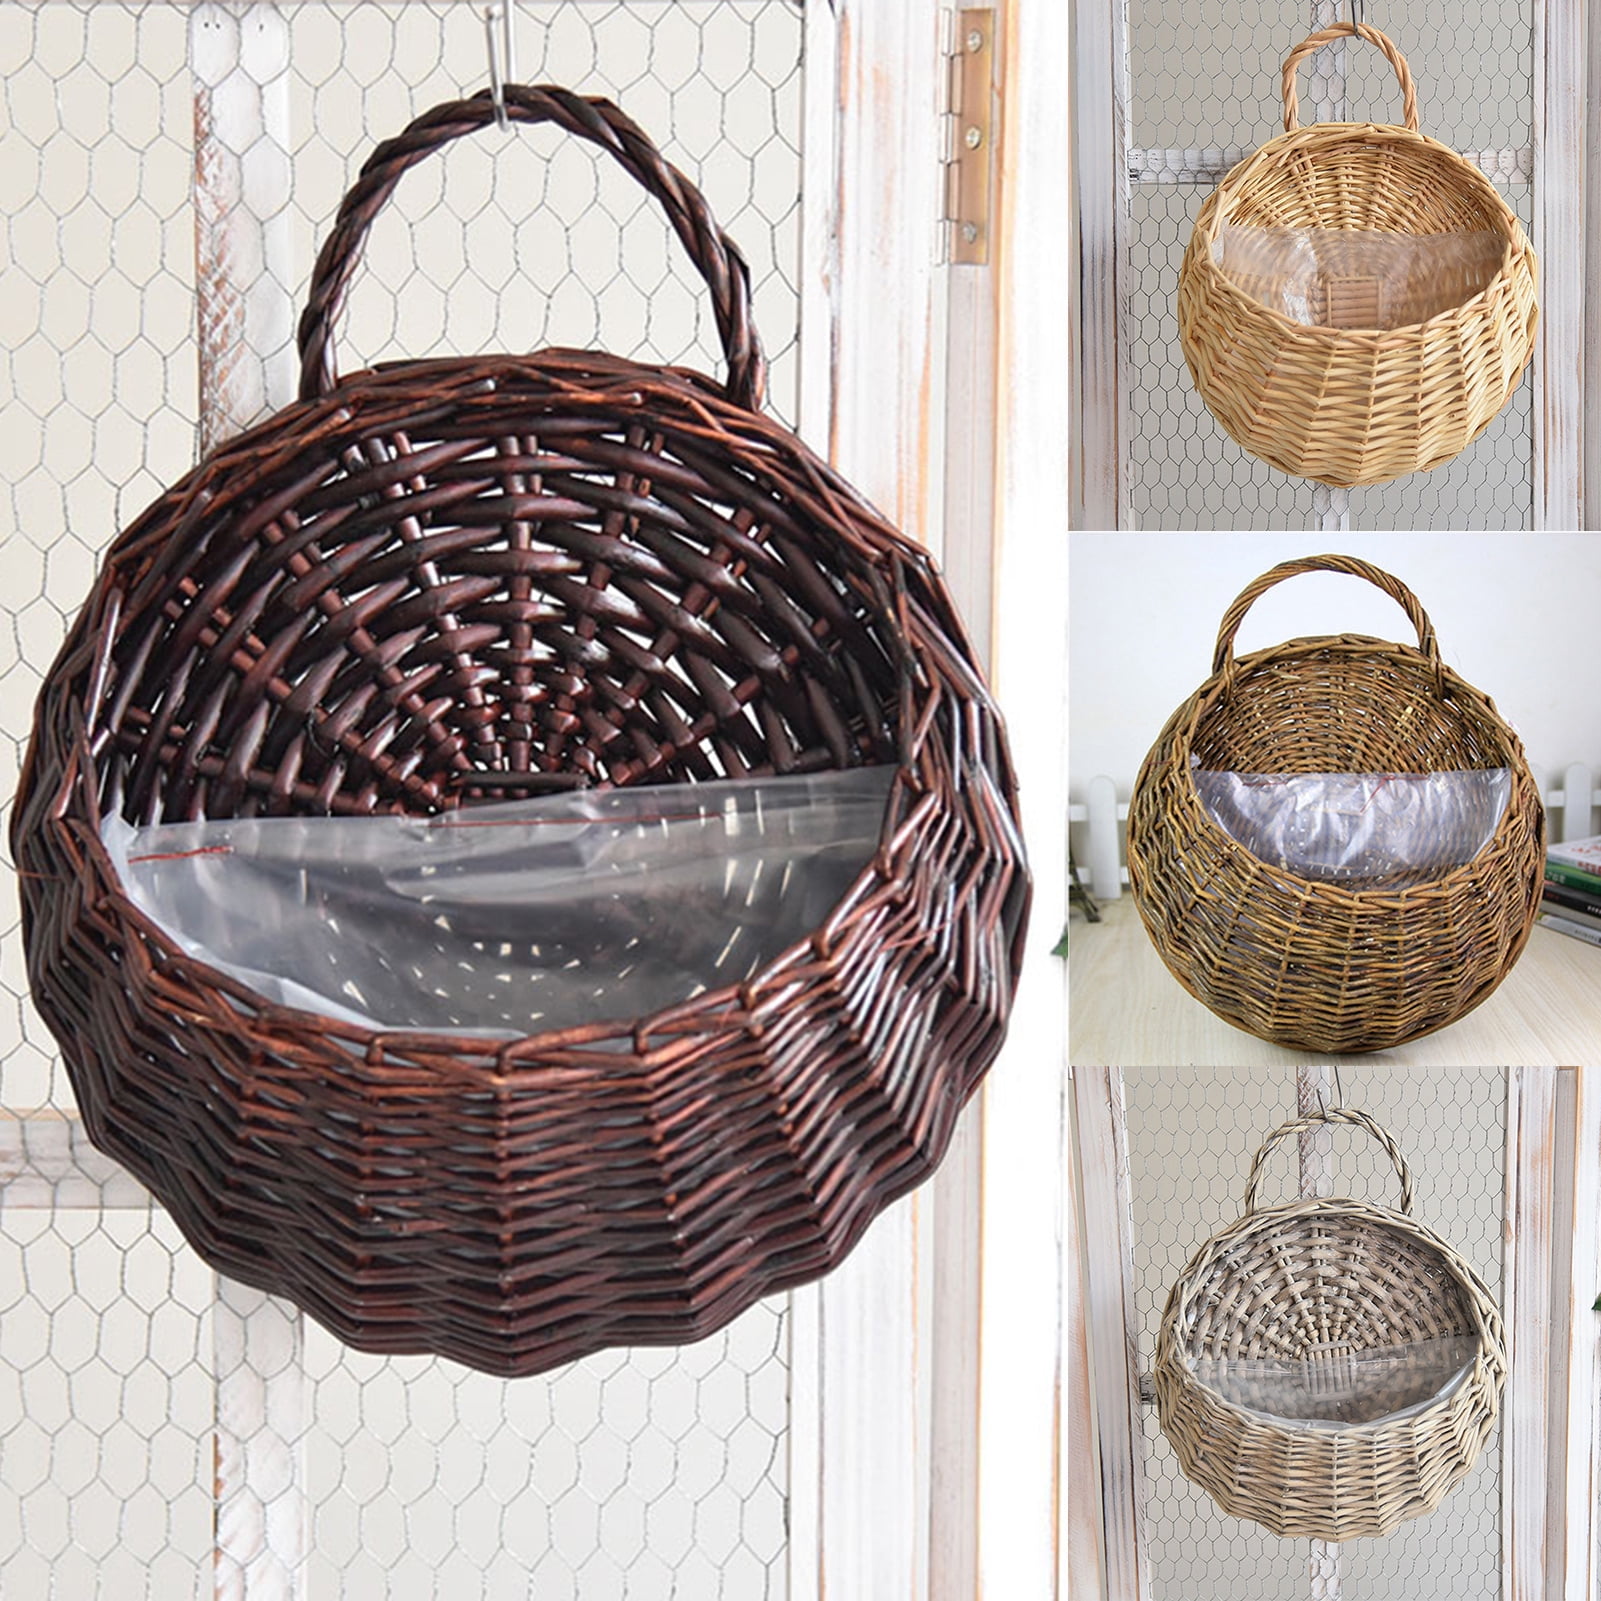 2 X 12" NATURAL WICKER HANGING BASKET LINED 30CM RATTAN WILLOW FLOWER PLANTER 